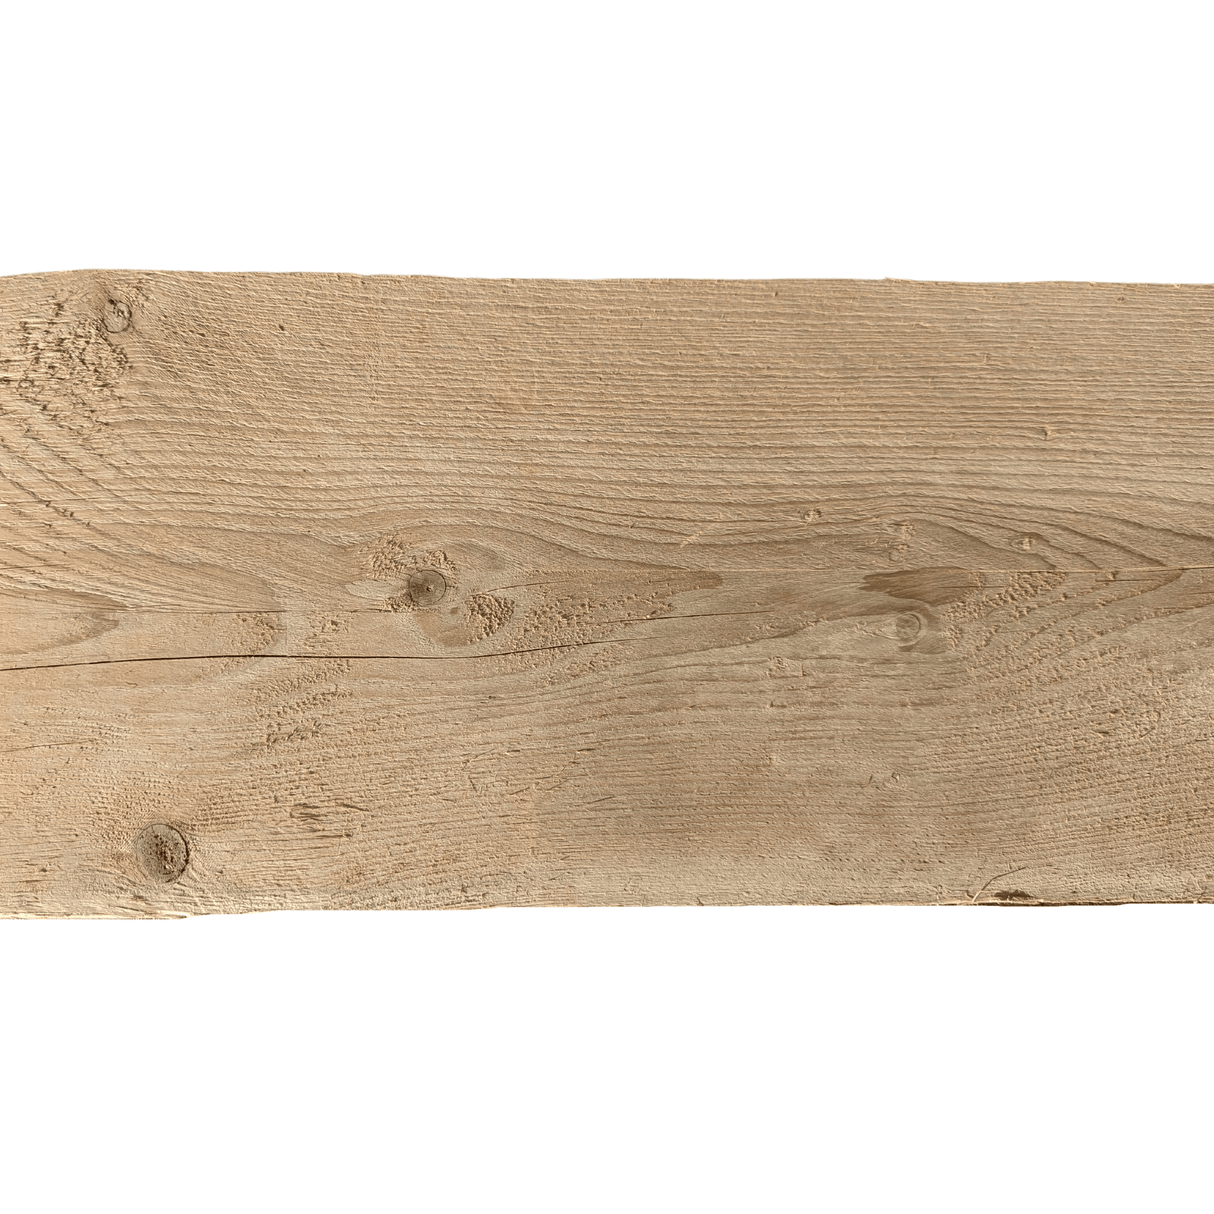 Reclaimed Scaffold Plank - Select Specific Size